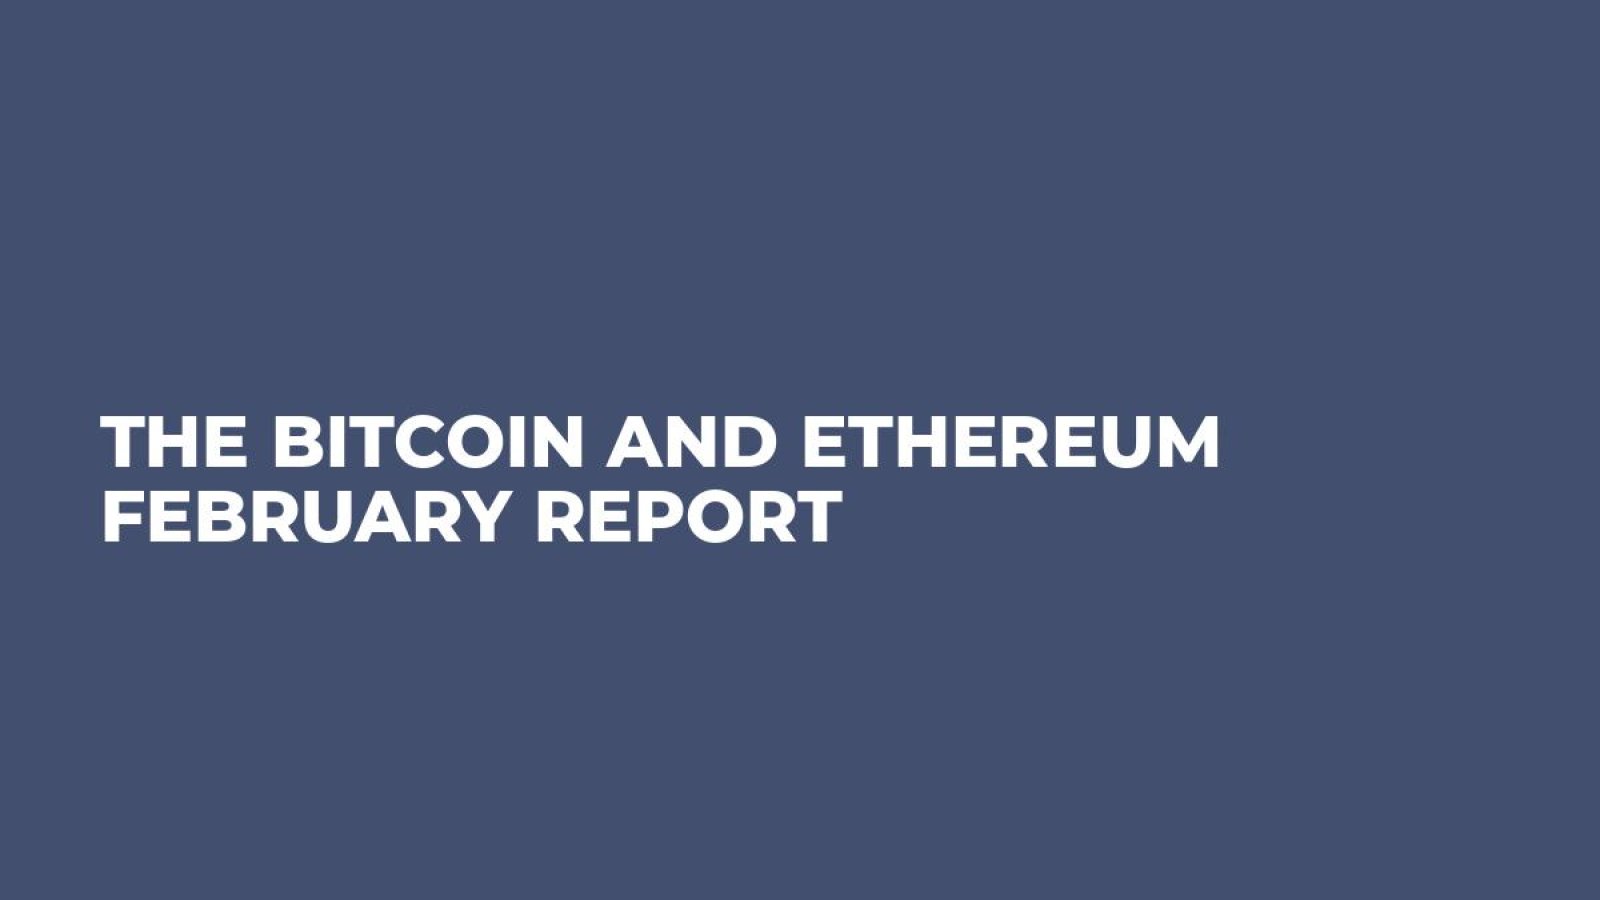 The Bitcoin and Ethereum February Report